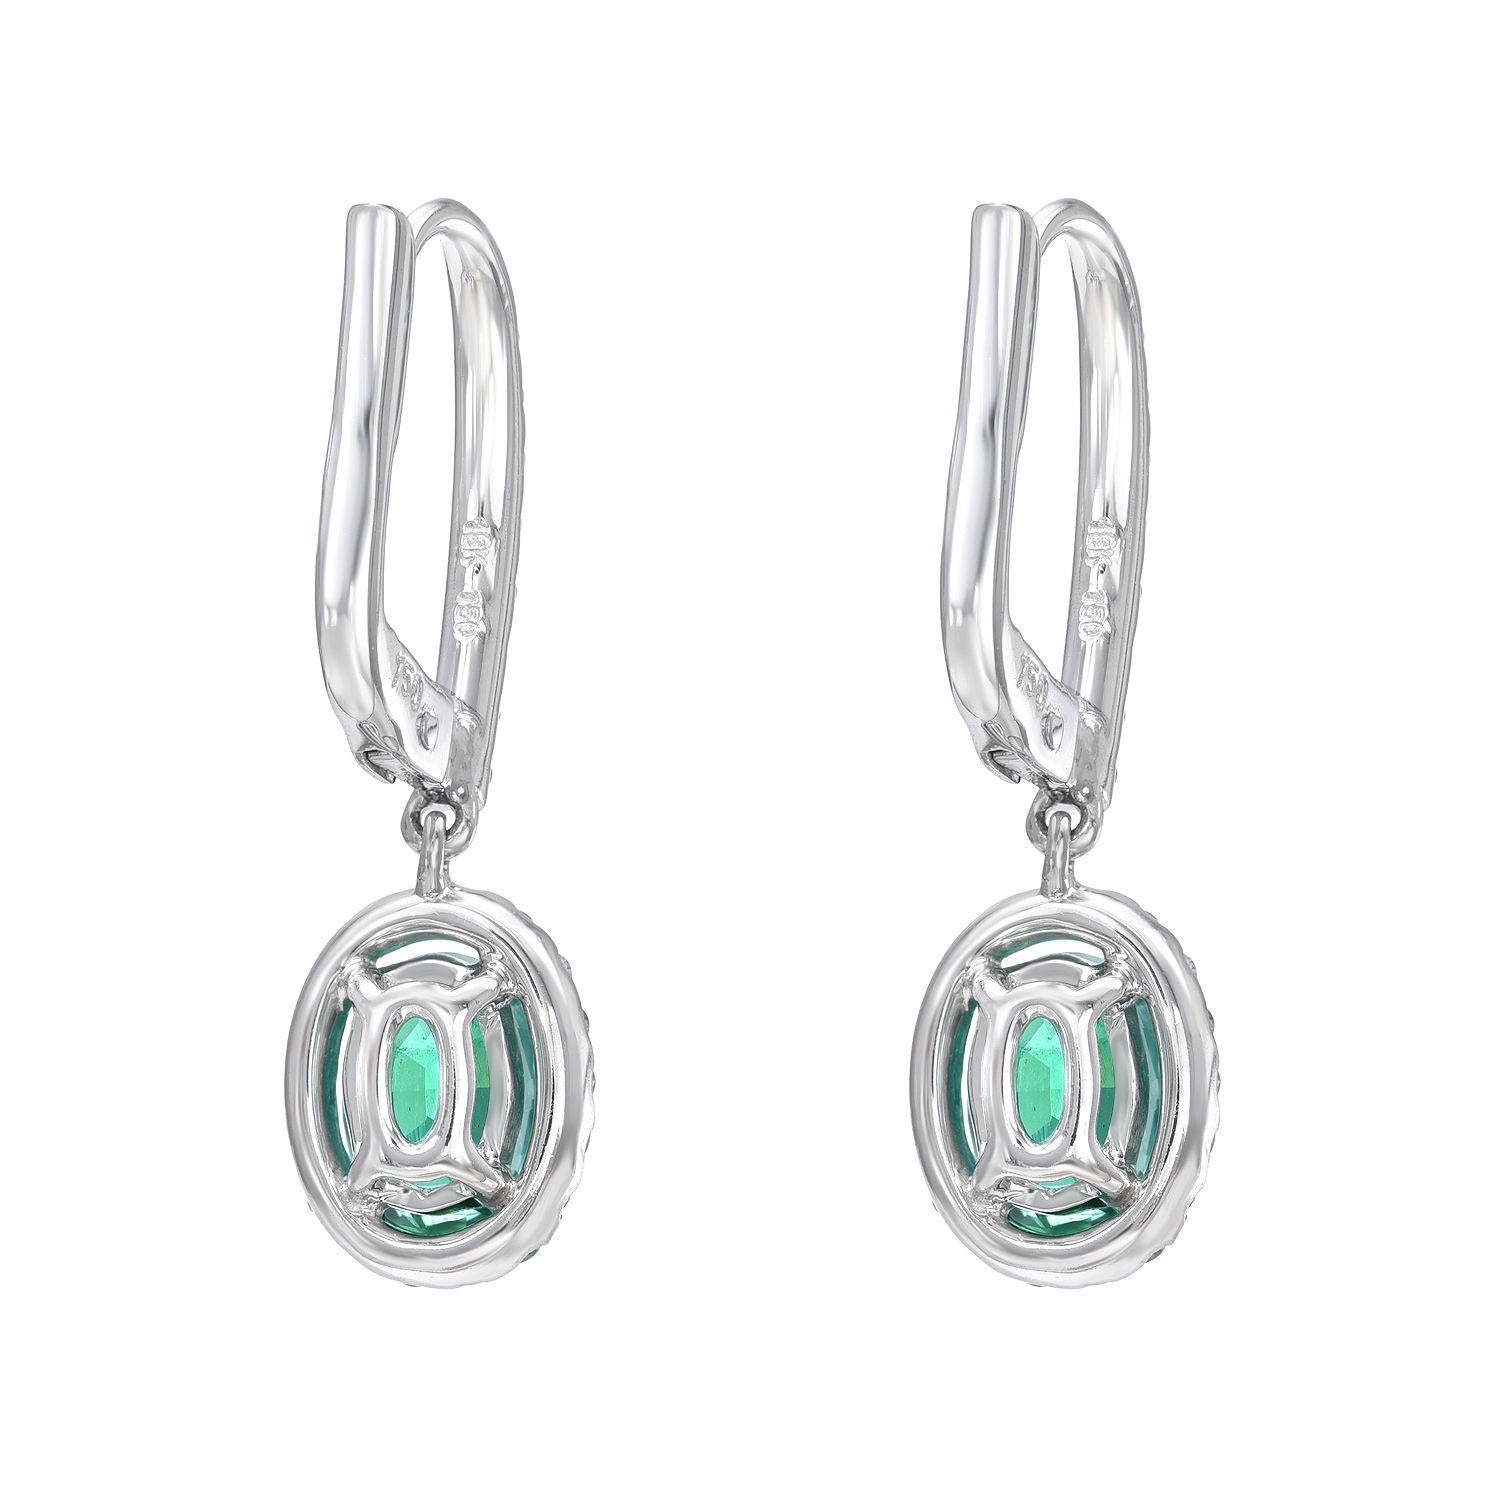 18K white gold lever-back earrings, featuring a pair of oval Emeralds weighing a total of 1.50 carats, adorned by diamonds weighing a total of 0.50 carats.
Approximately 1 inch in length.
Returns are accepted and paid by us within 7 days of